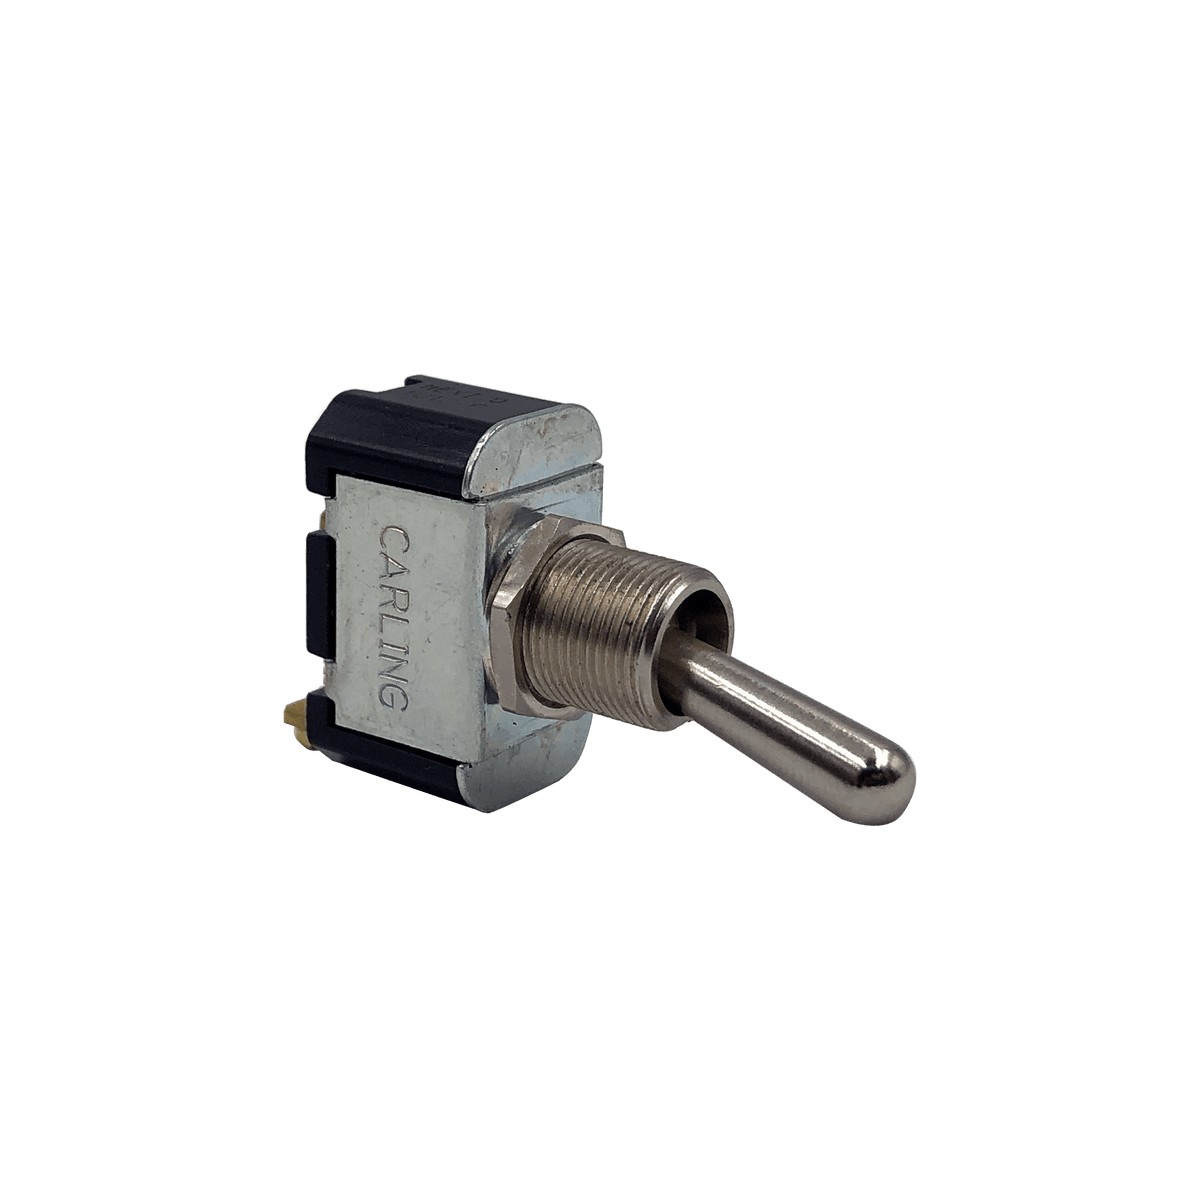 Toggle Switch for Mobile Generator